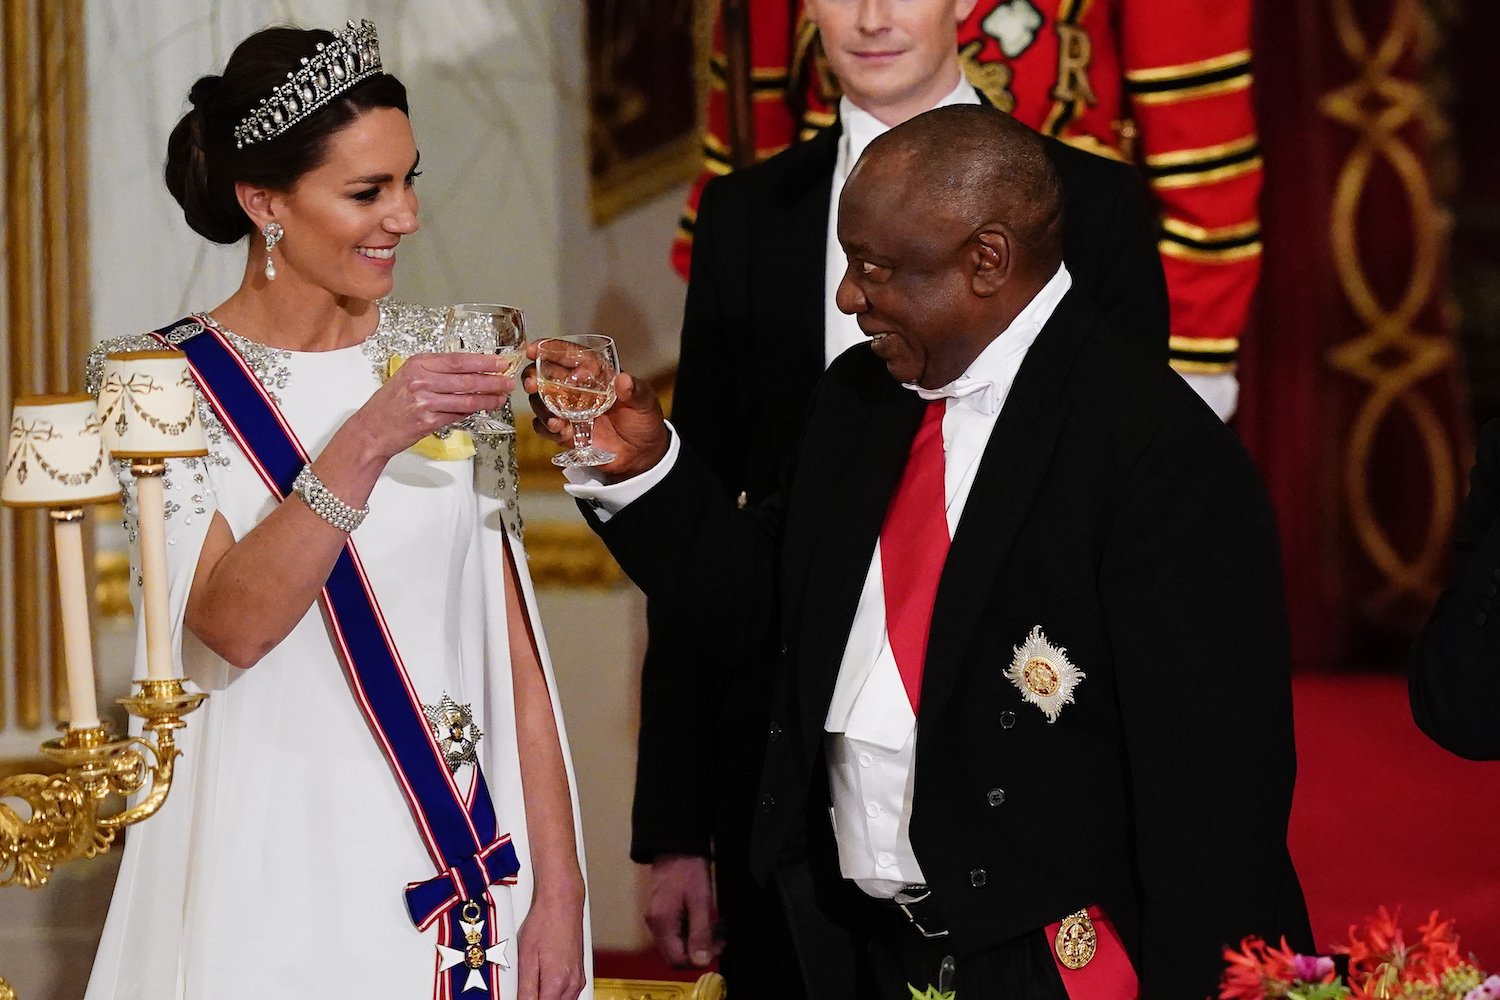 Kate Middleton body language and fashion choice at state dinner analyzed by expert